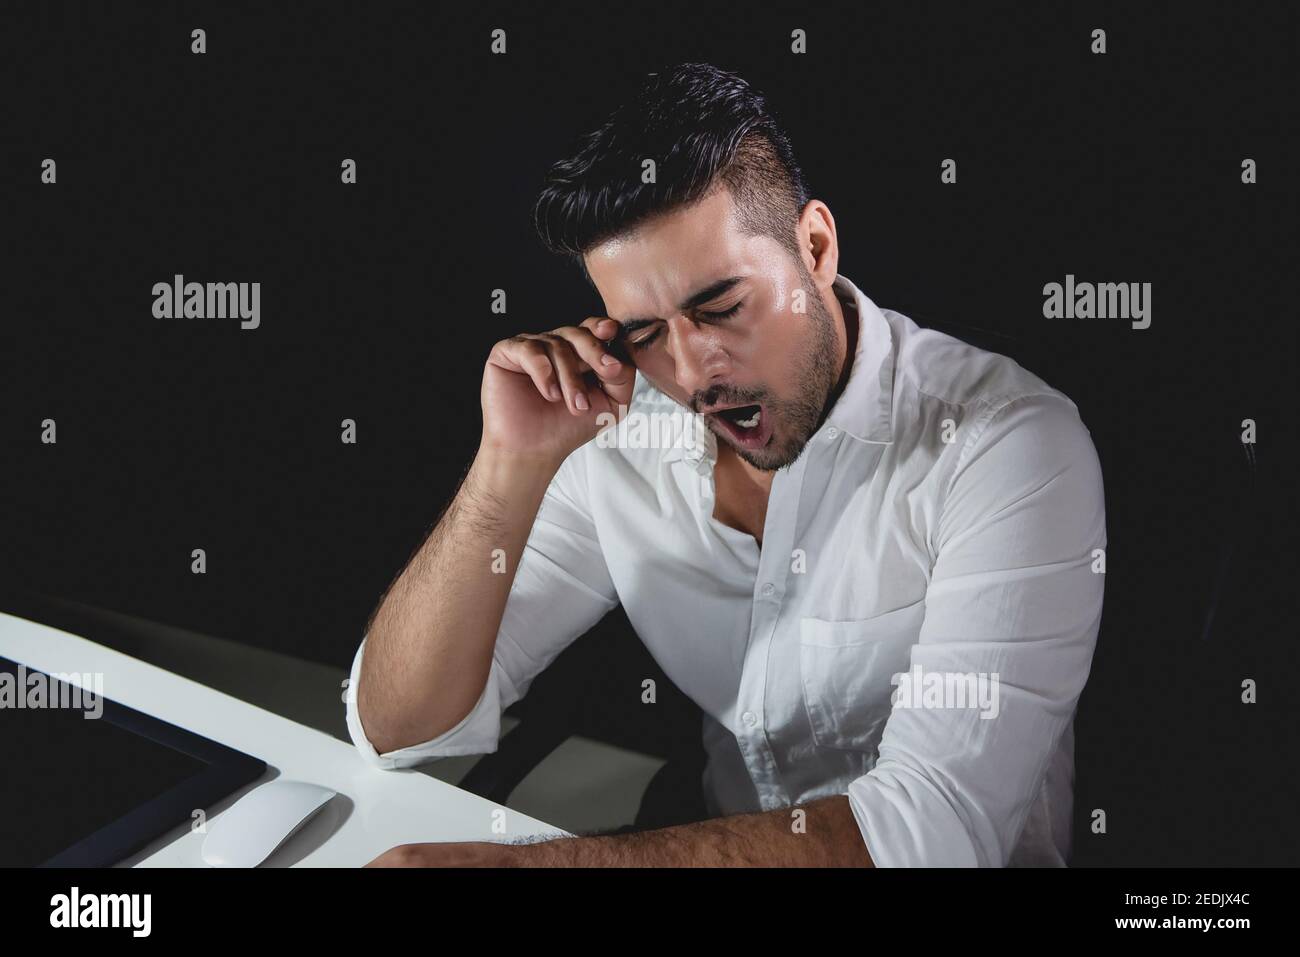 Tired fatigued Asian businessman feeling sleepy and yawning while working night shift Stock Photo